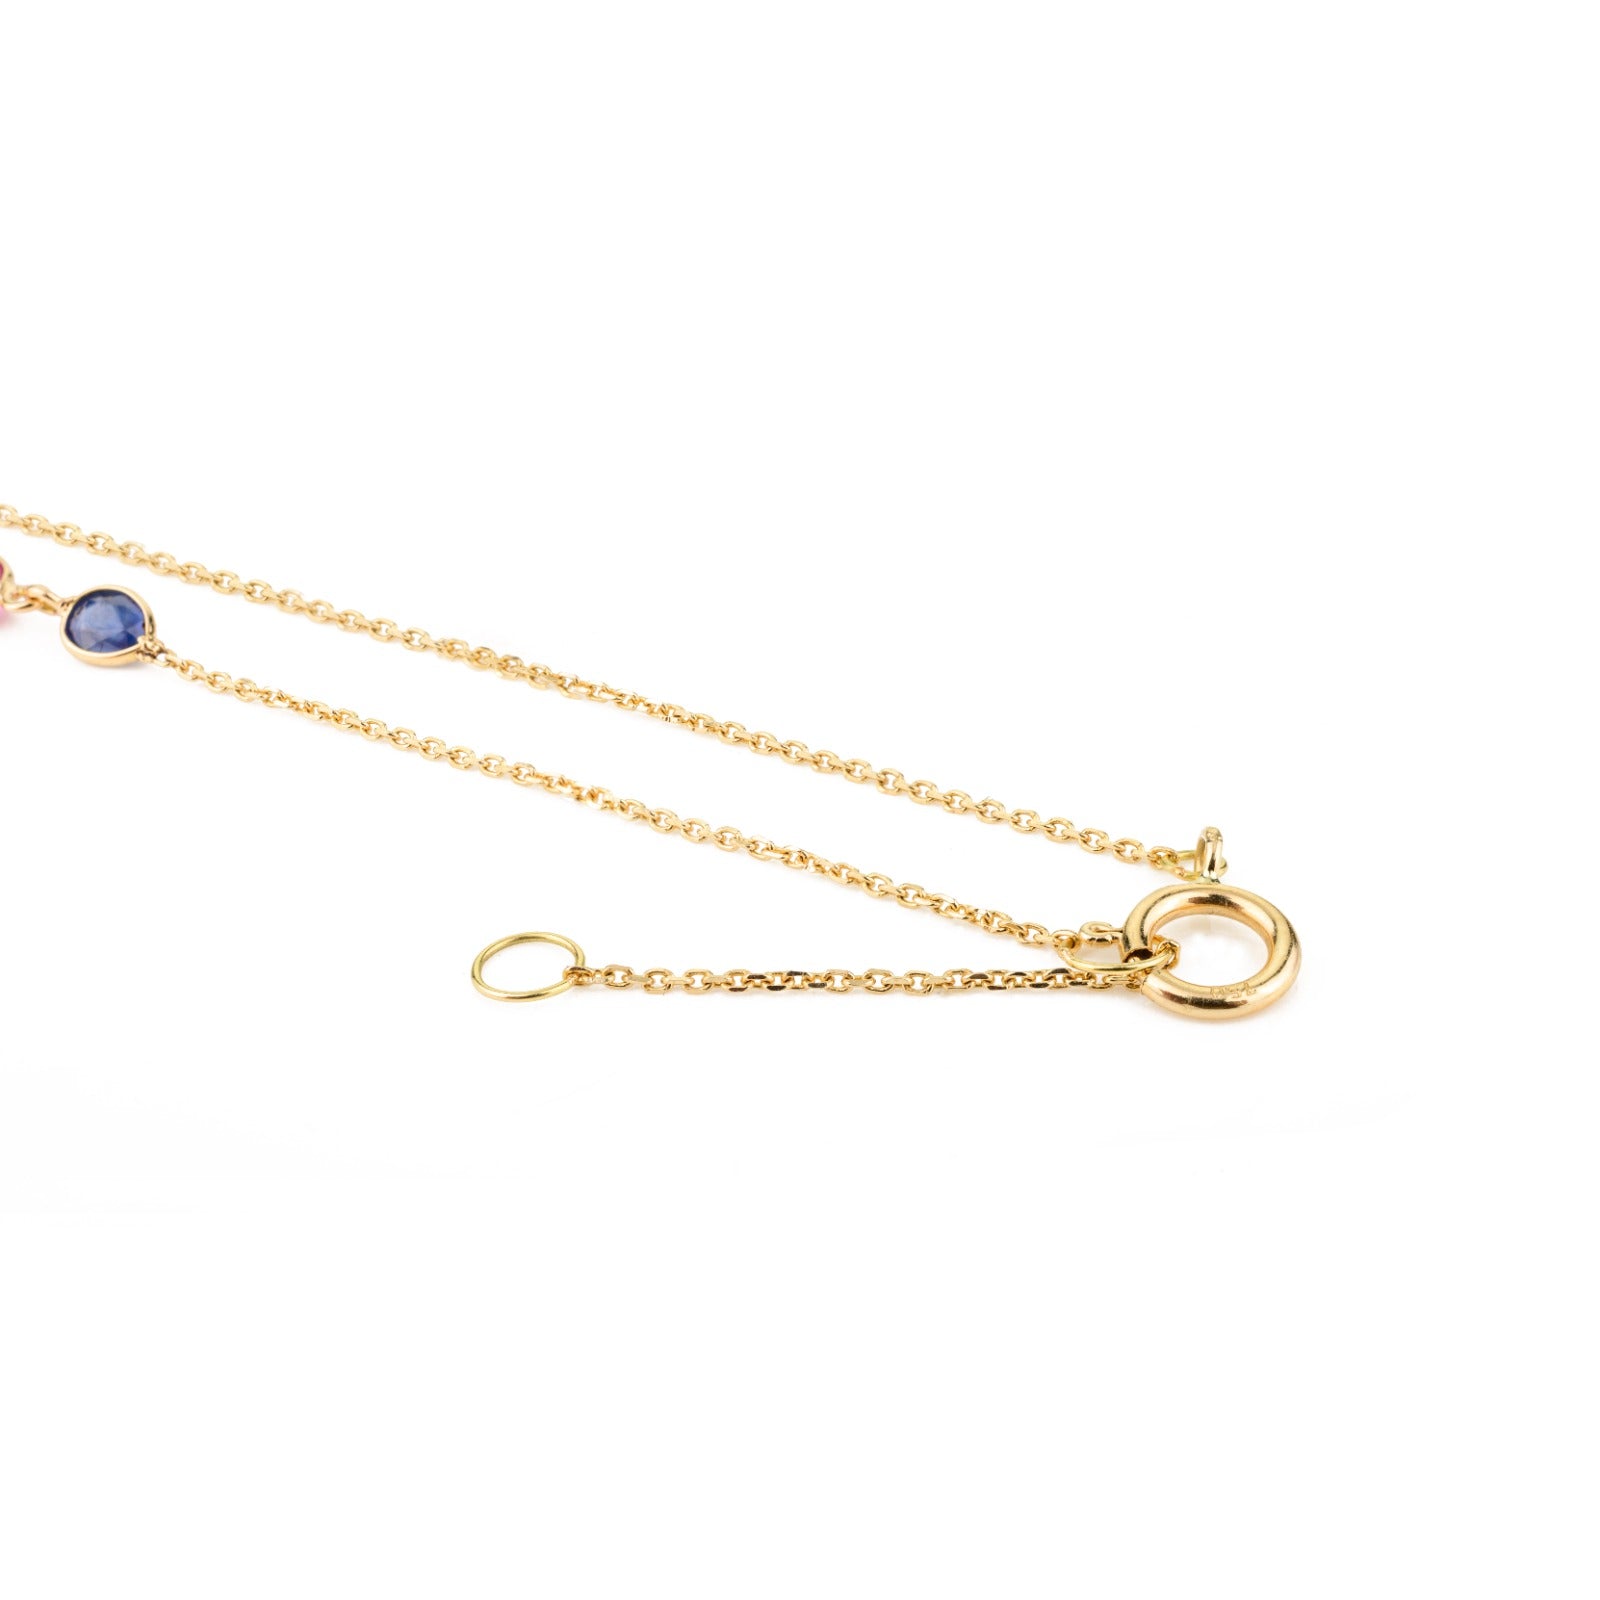 18K Solid Yellow Gold Multi Gemstone Station Necklace